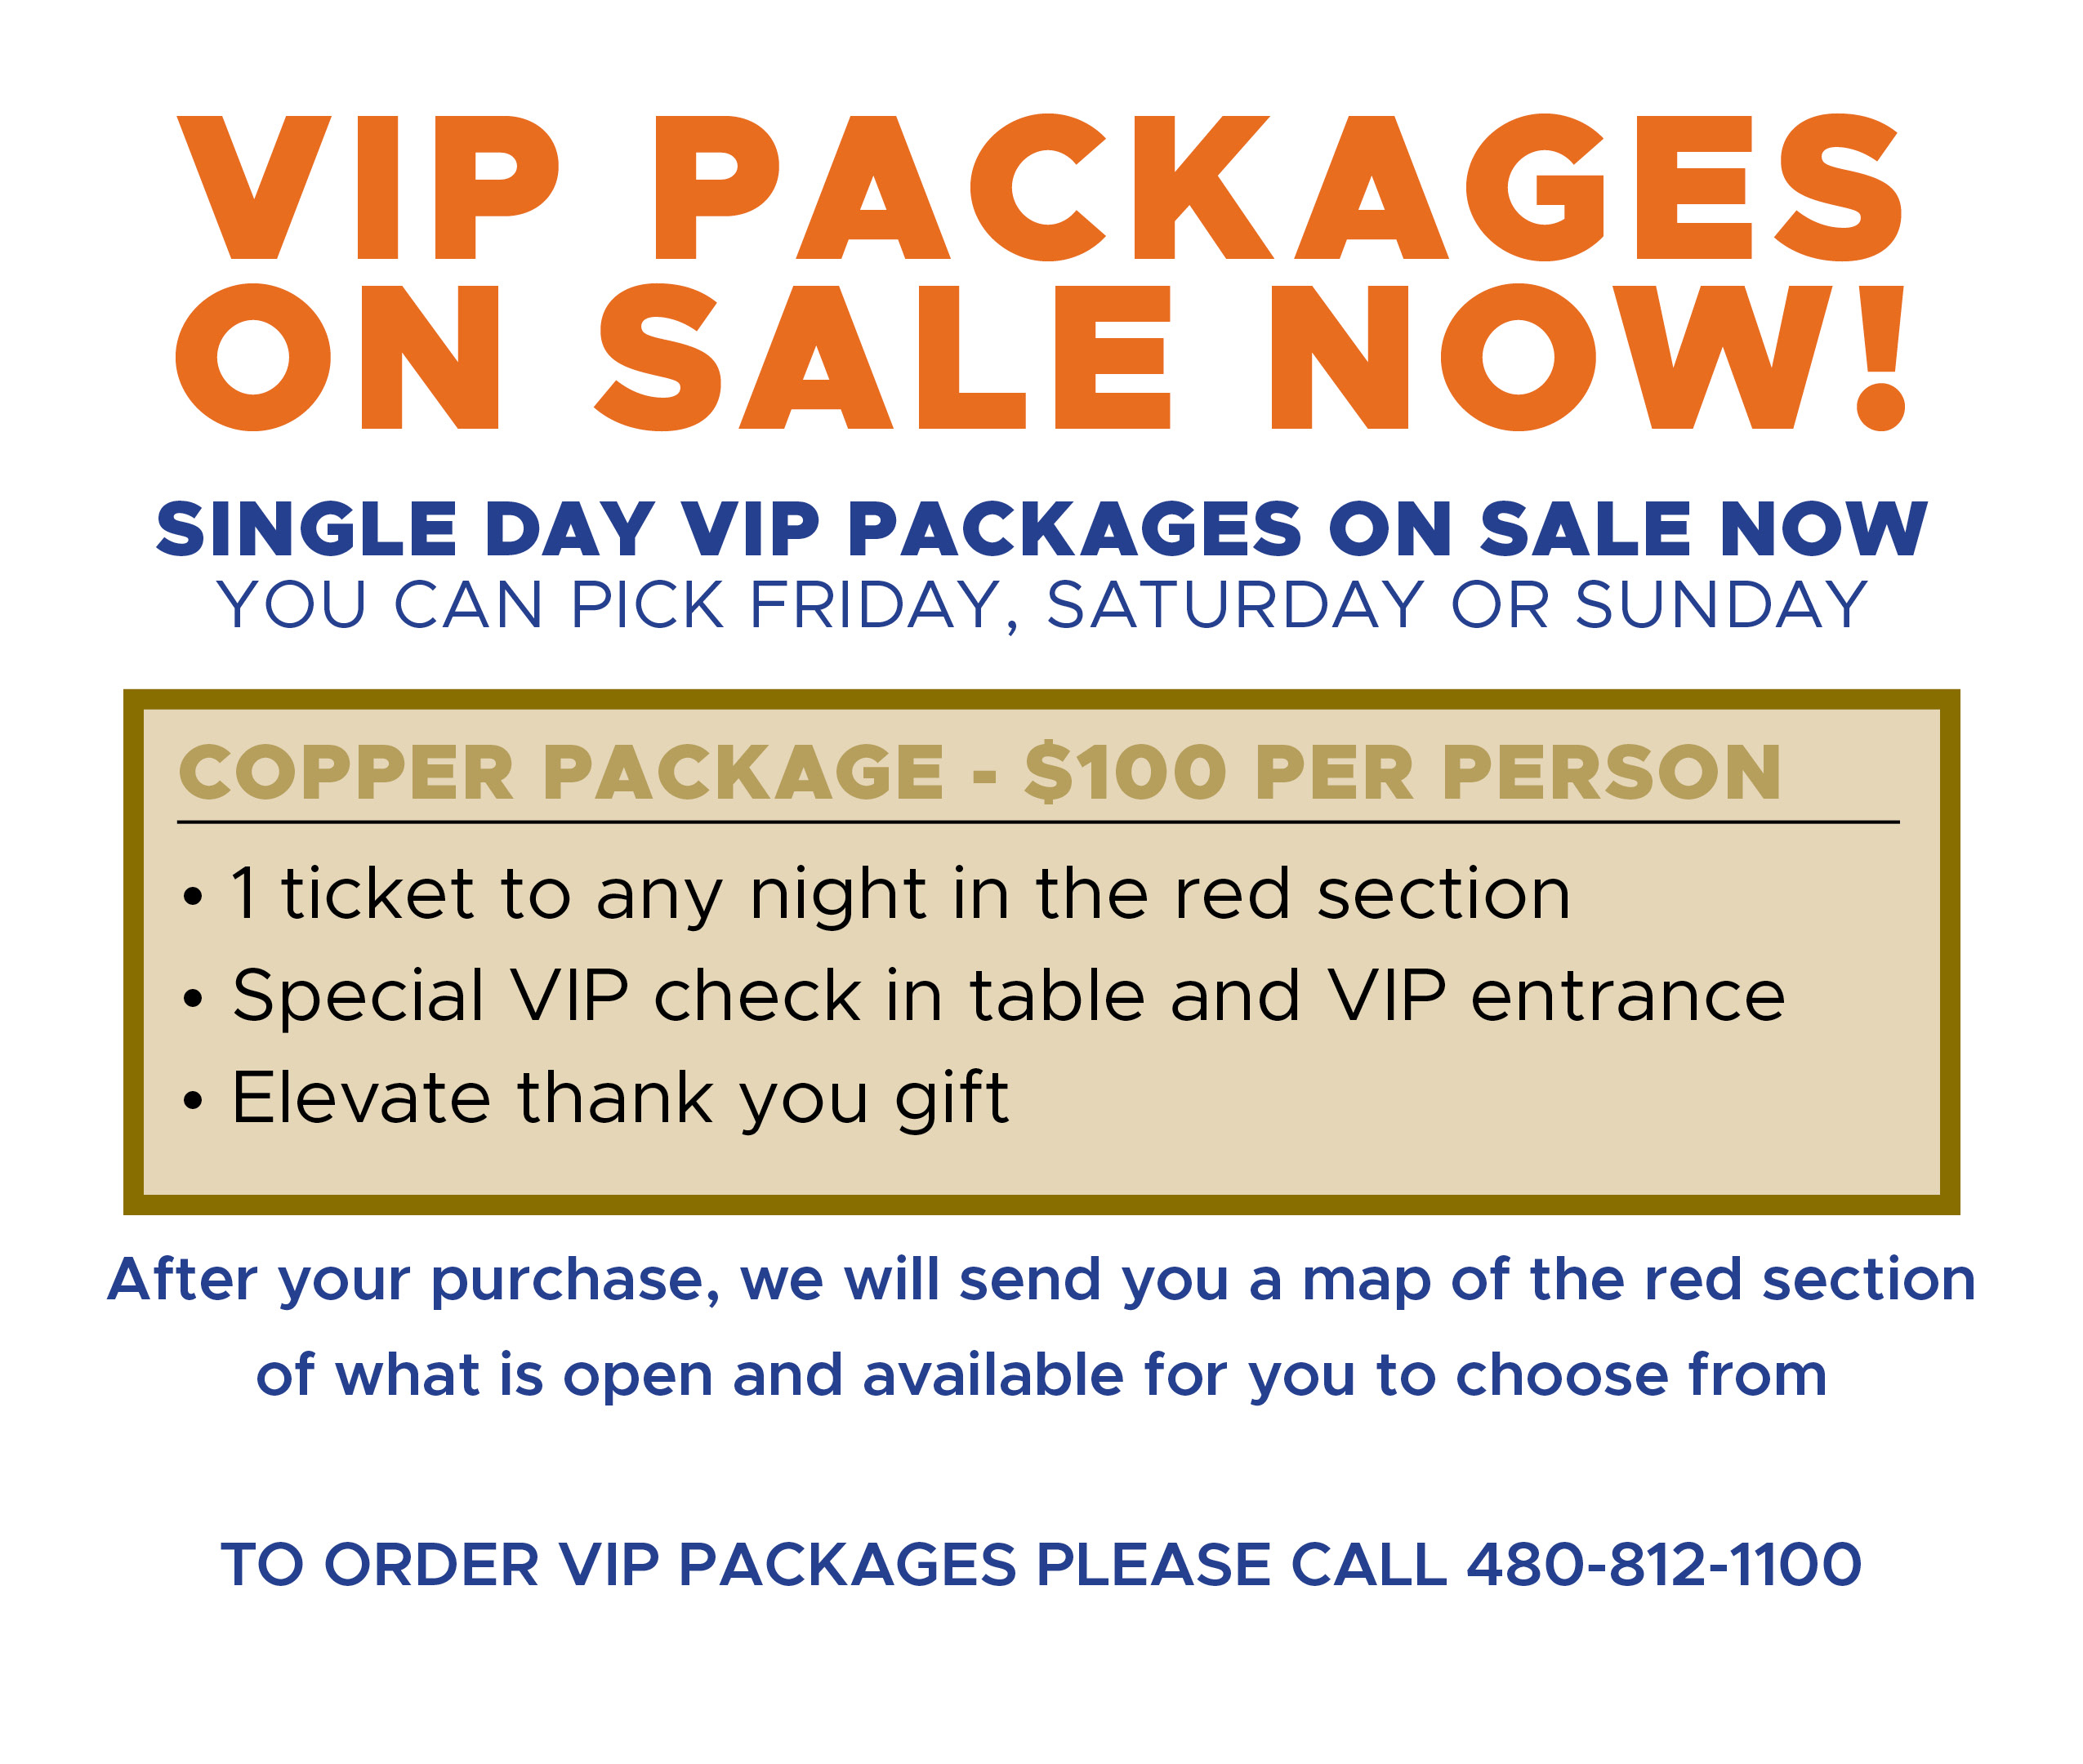 VIP Packages